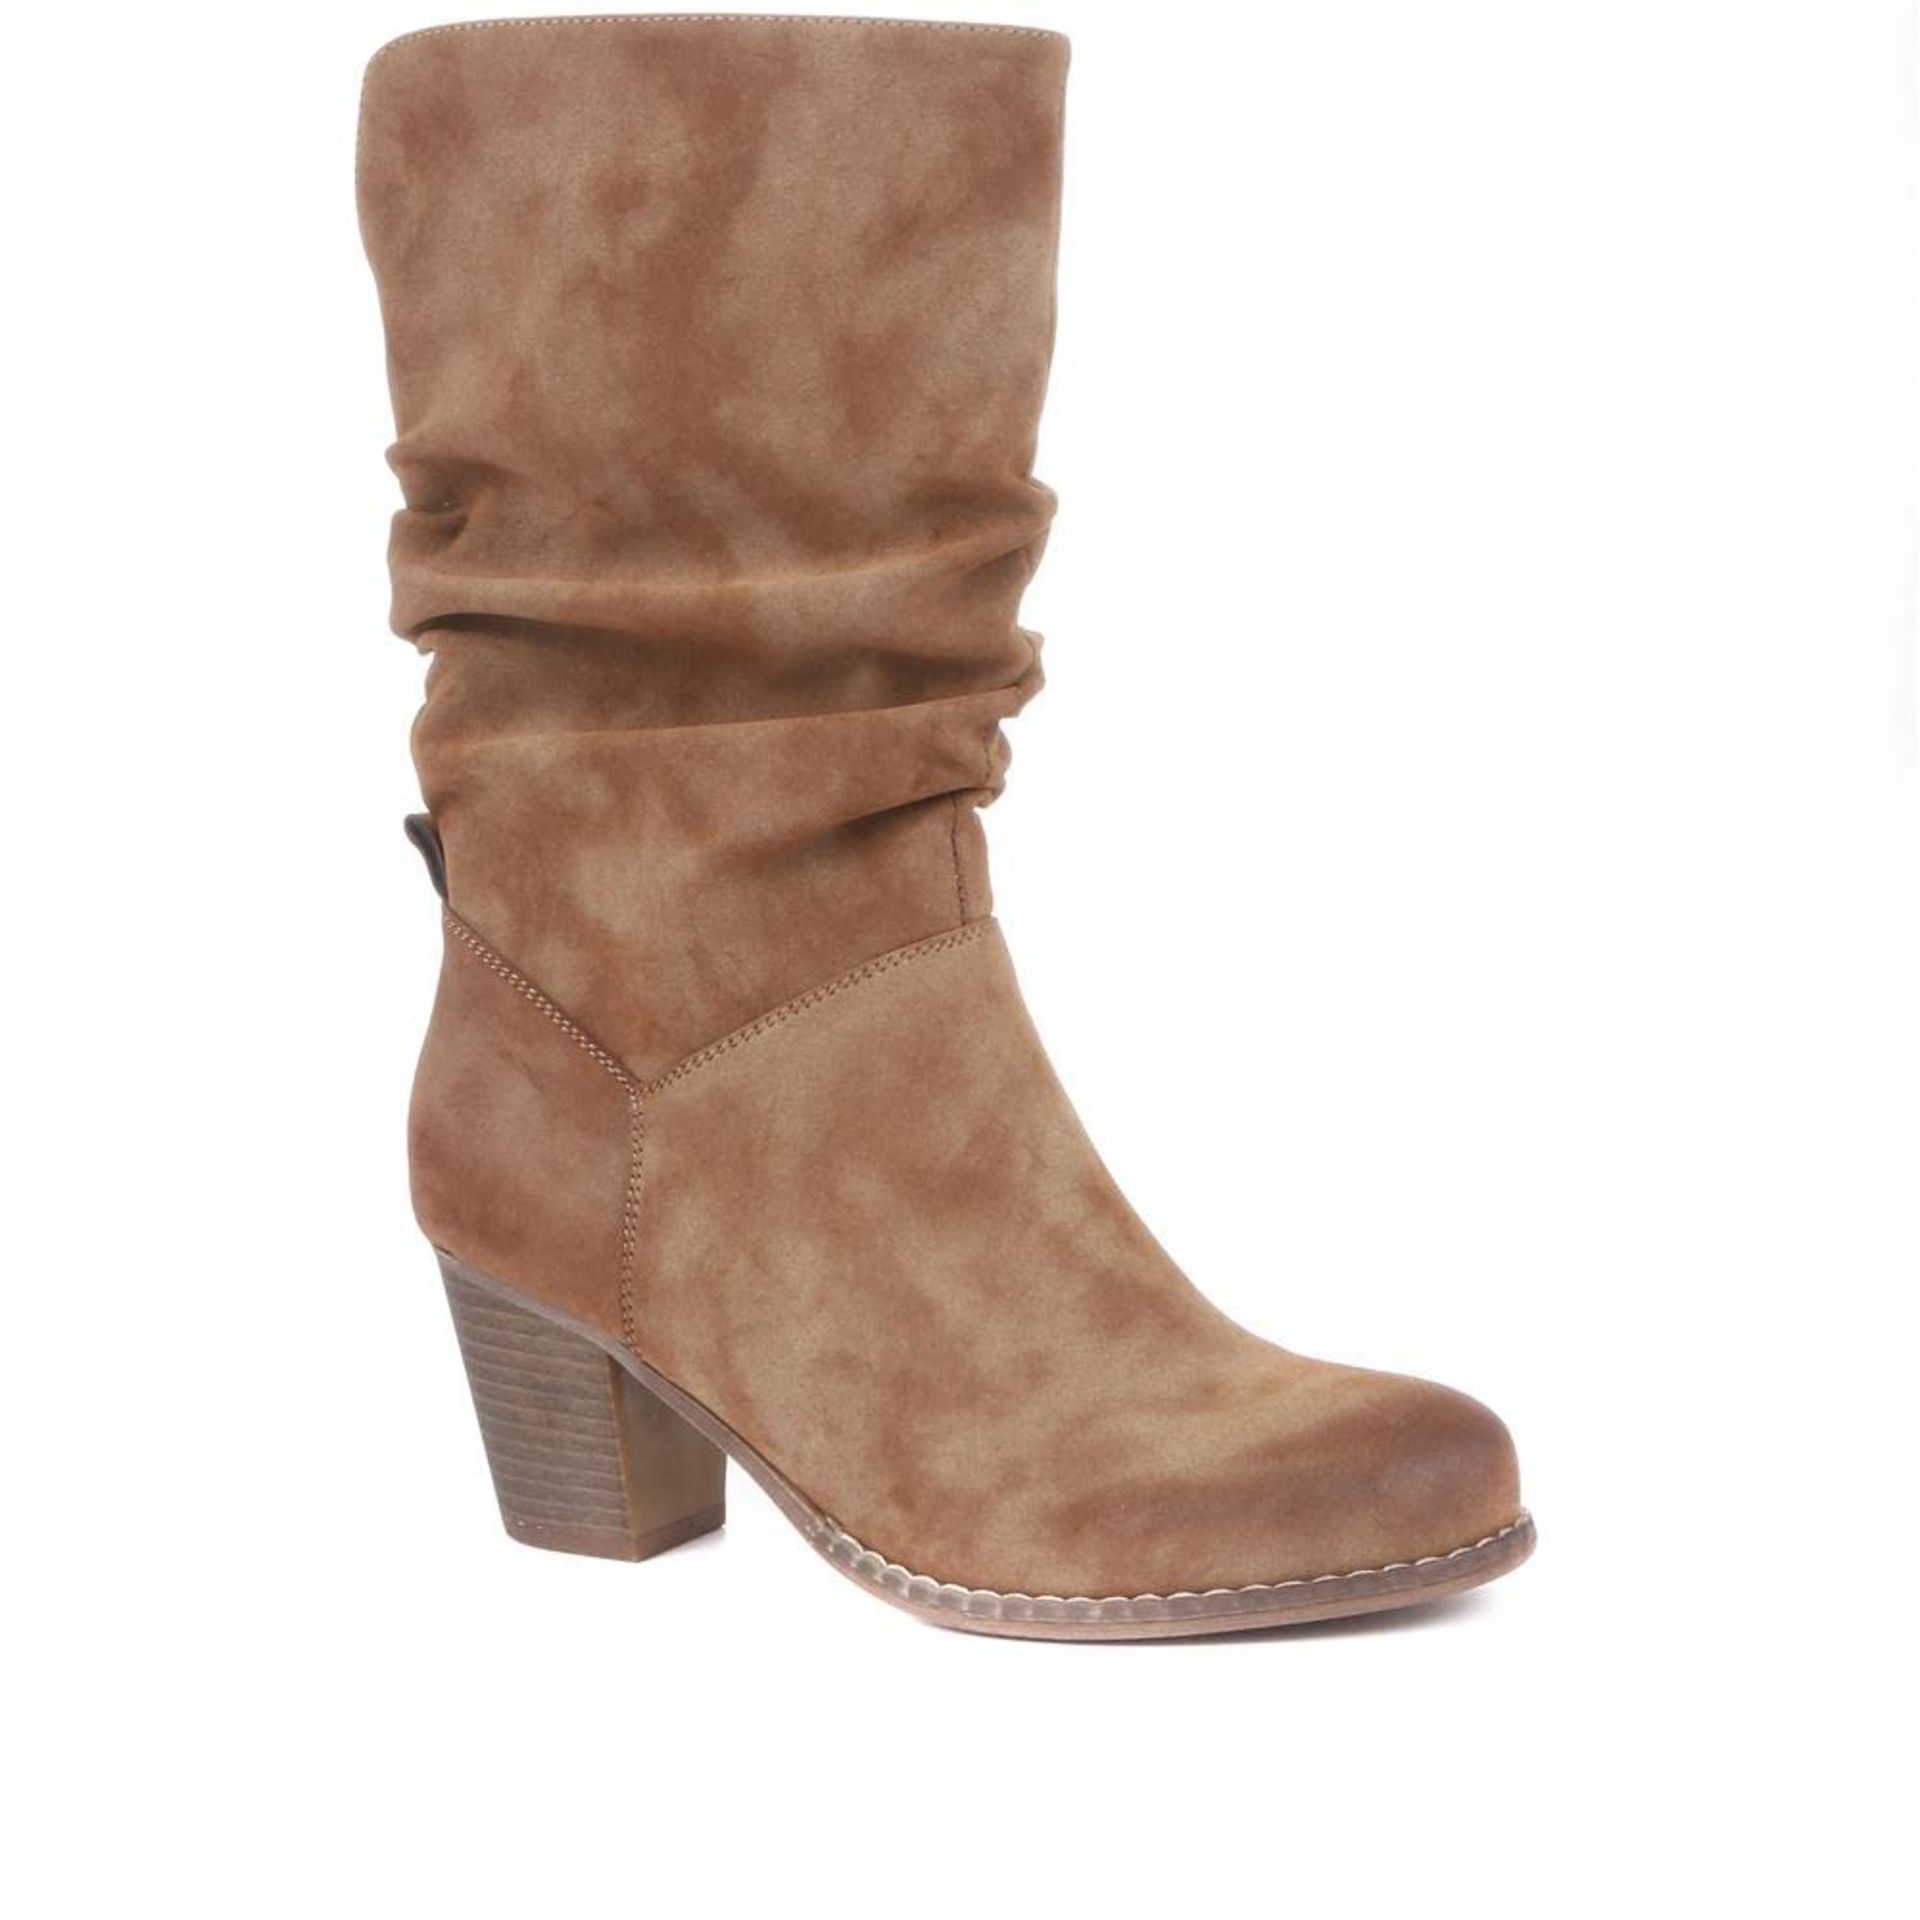 RRP £39.95 Pavers Ladies Slouch Boots - Tan Size 4 (37)